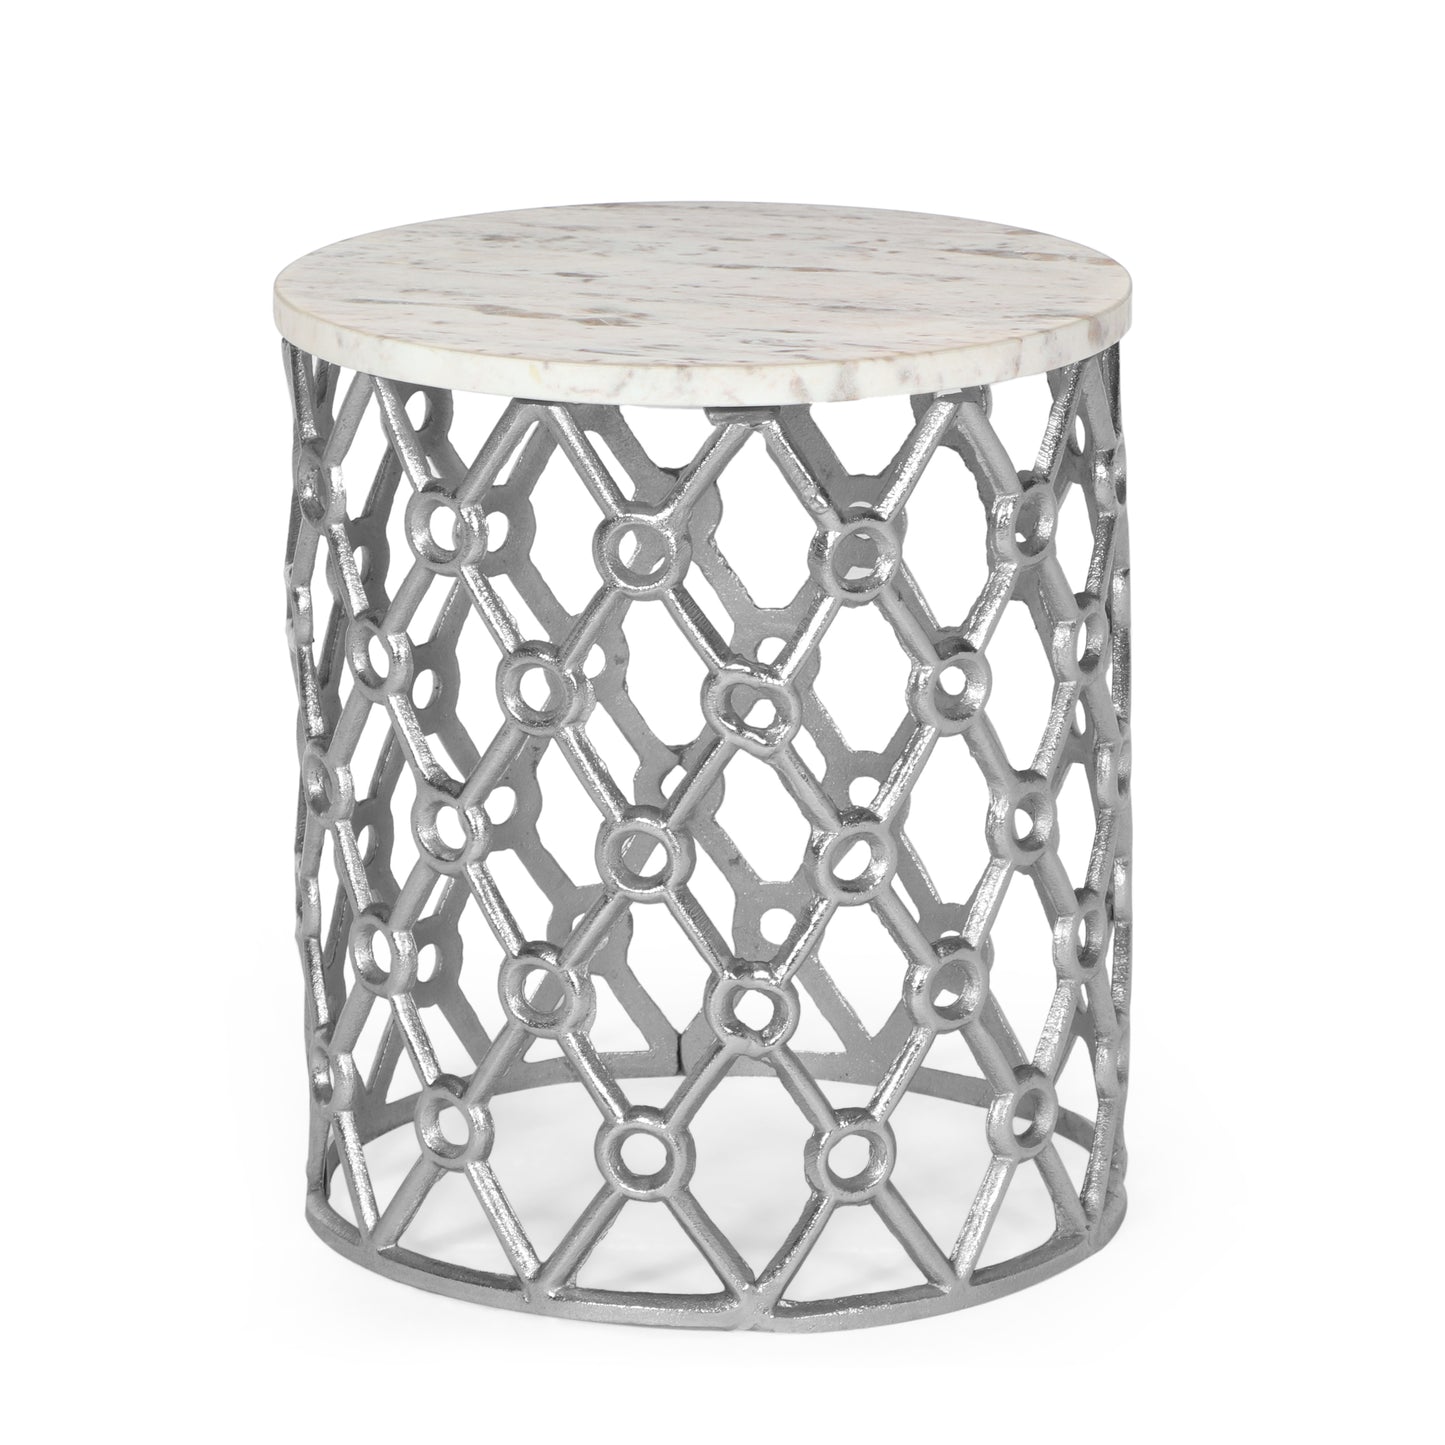 Gieke Modern Glam Handcrafted Marble Top Aluminum Side Table, Nickel and White